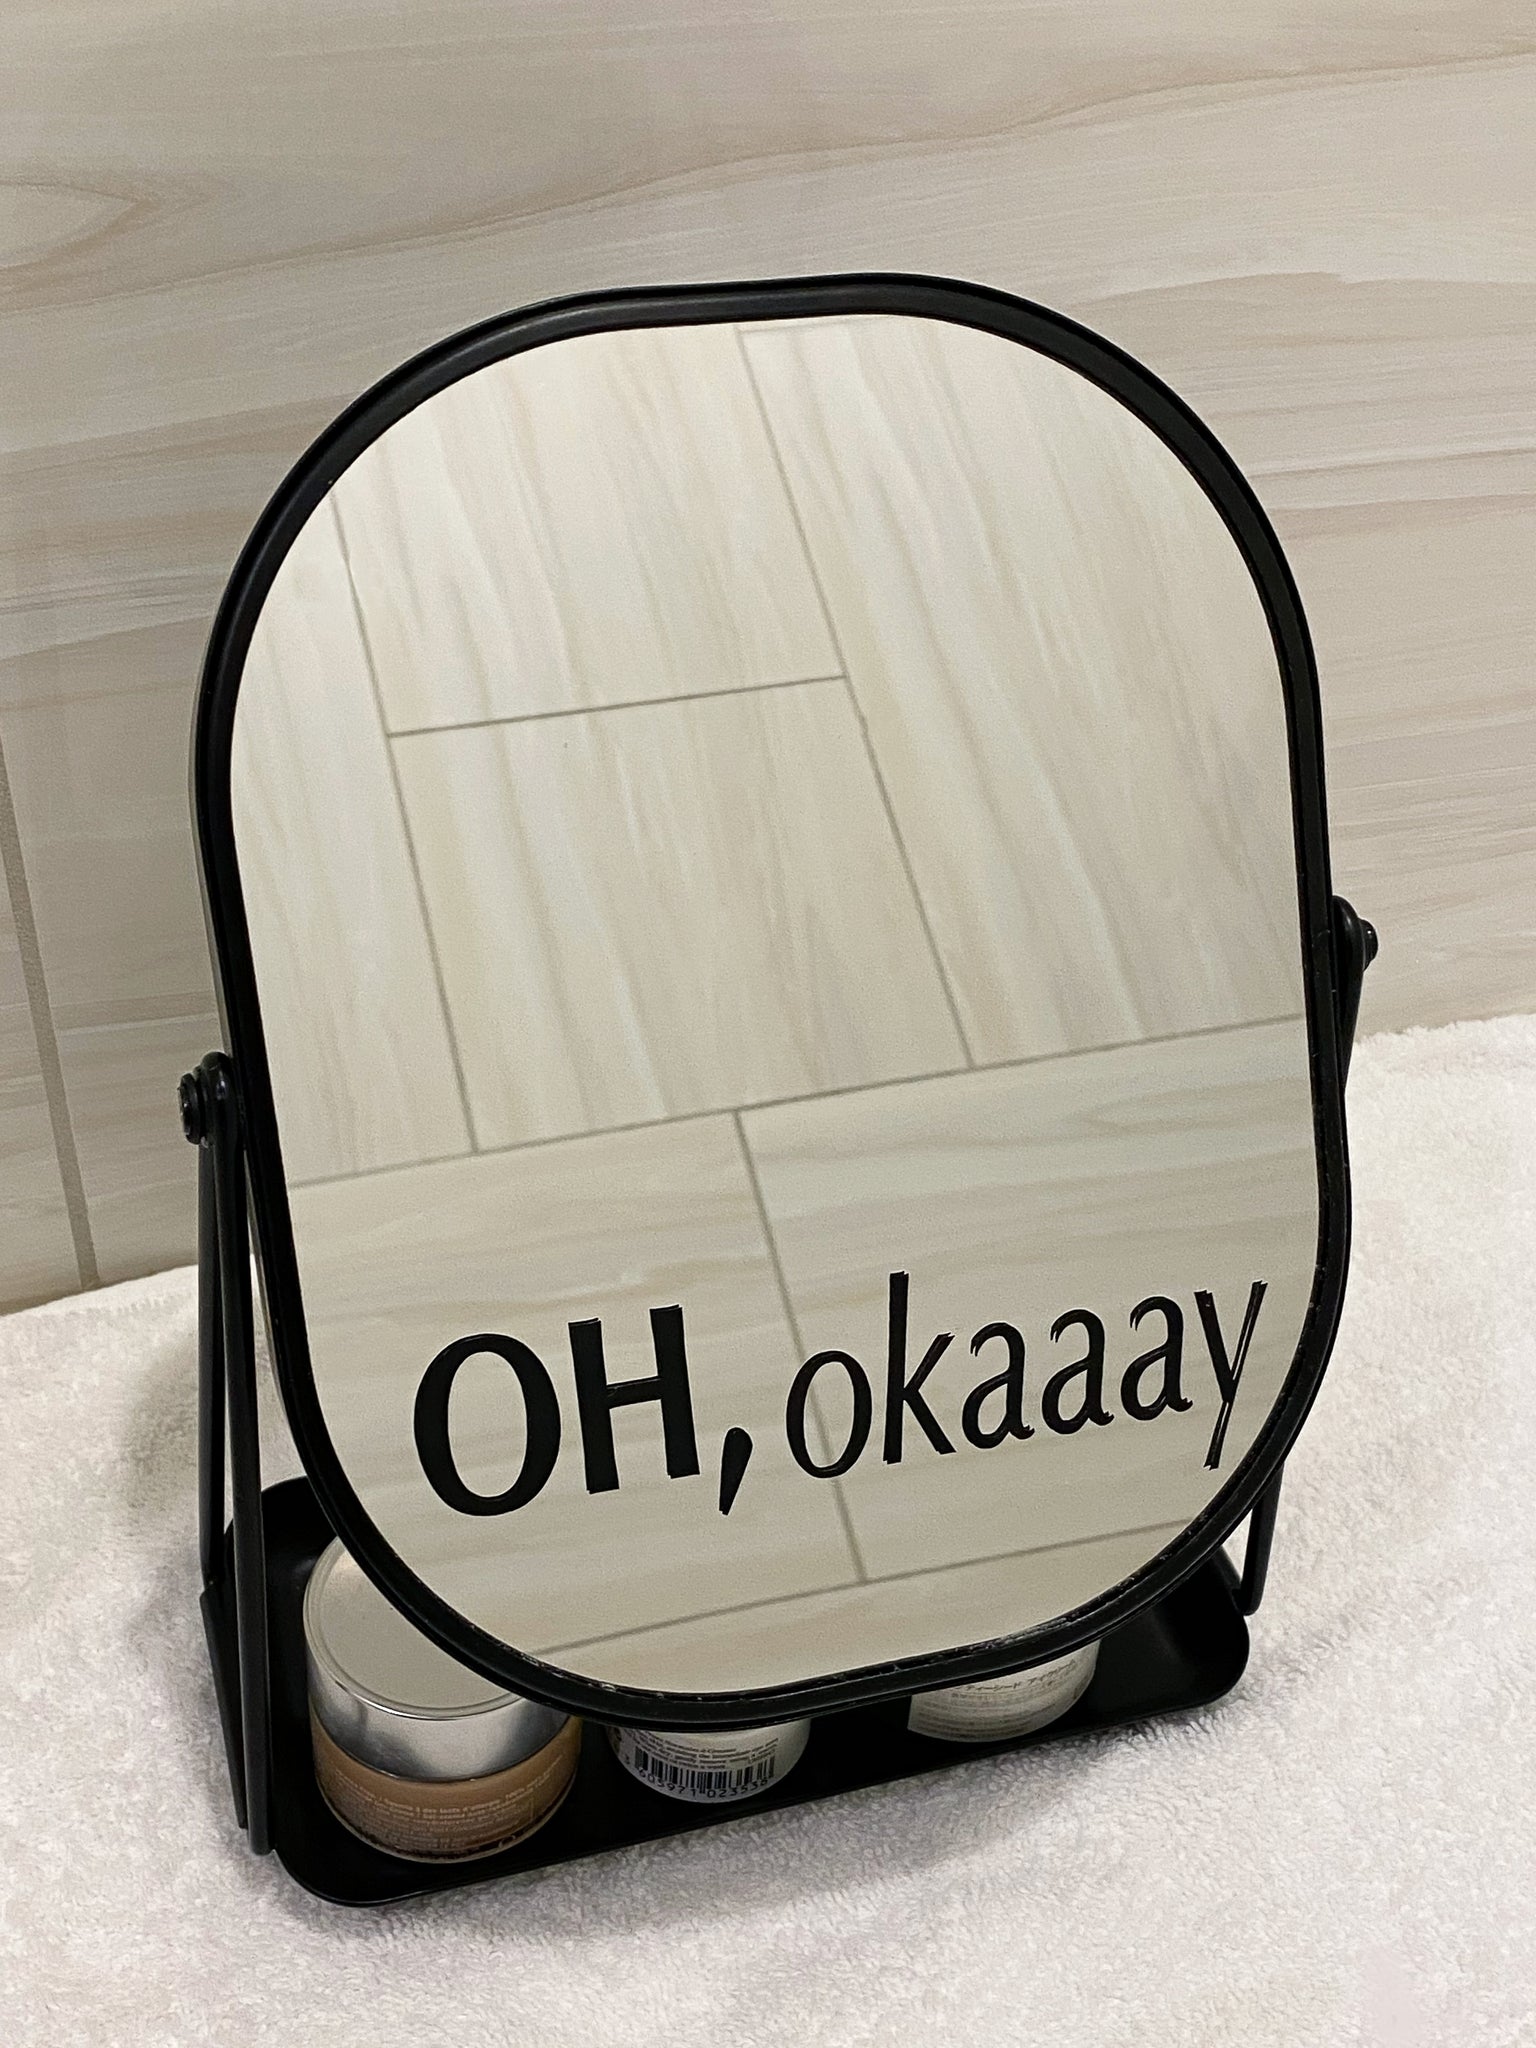 Black positive affirmation mirror decal for daily positive affirmation. Mirror affirmation decal placed on modern black mirror for bathroom. Black mirror for bathroom has a tray for skincare products. 